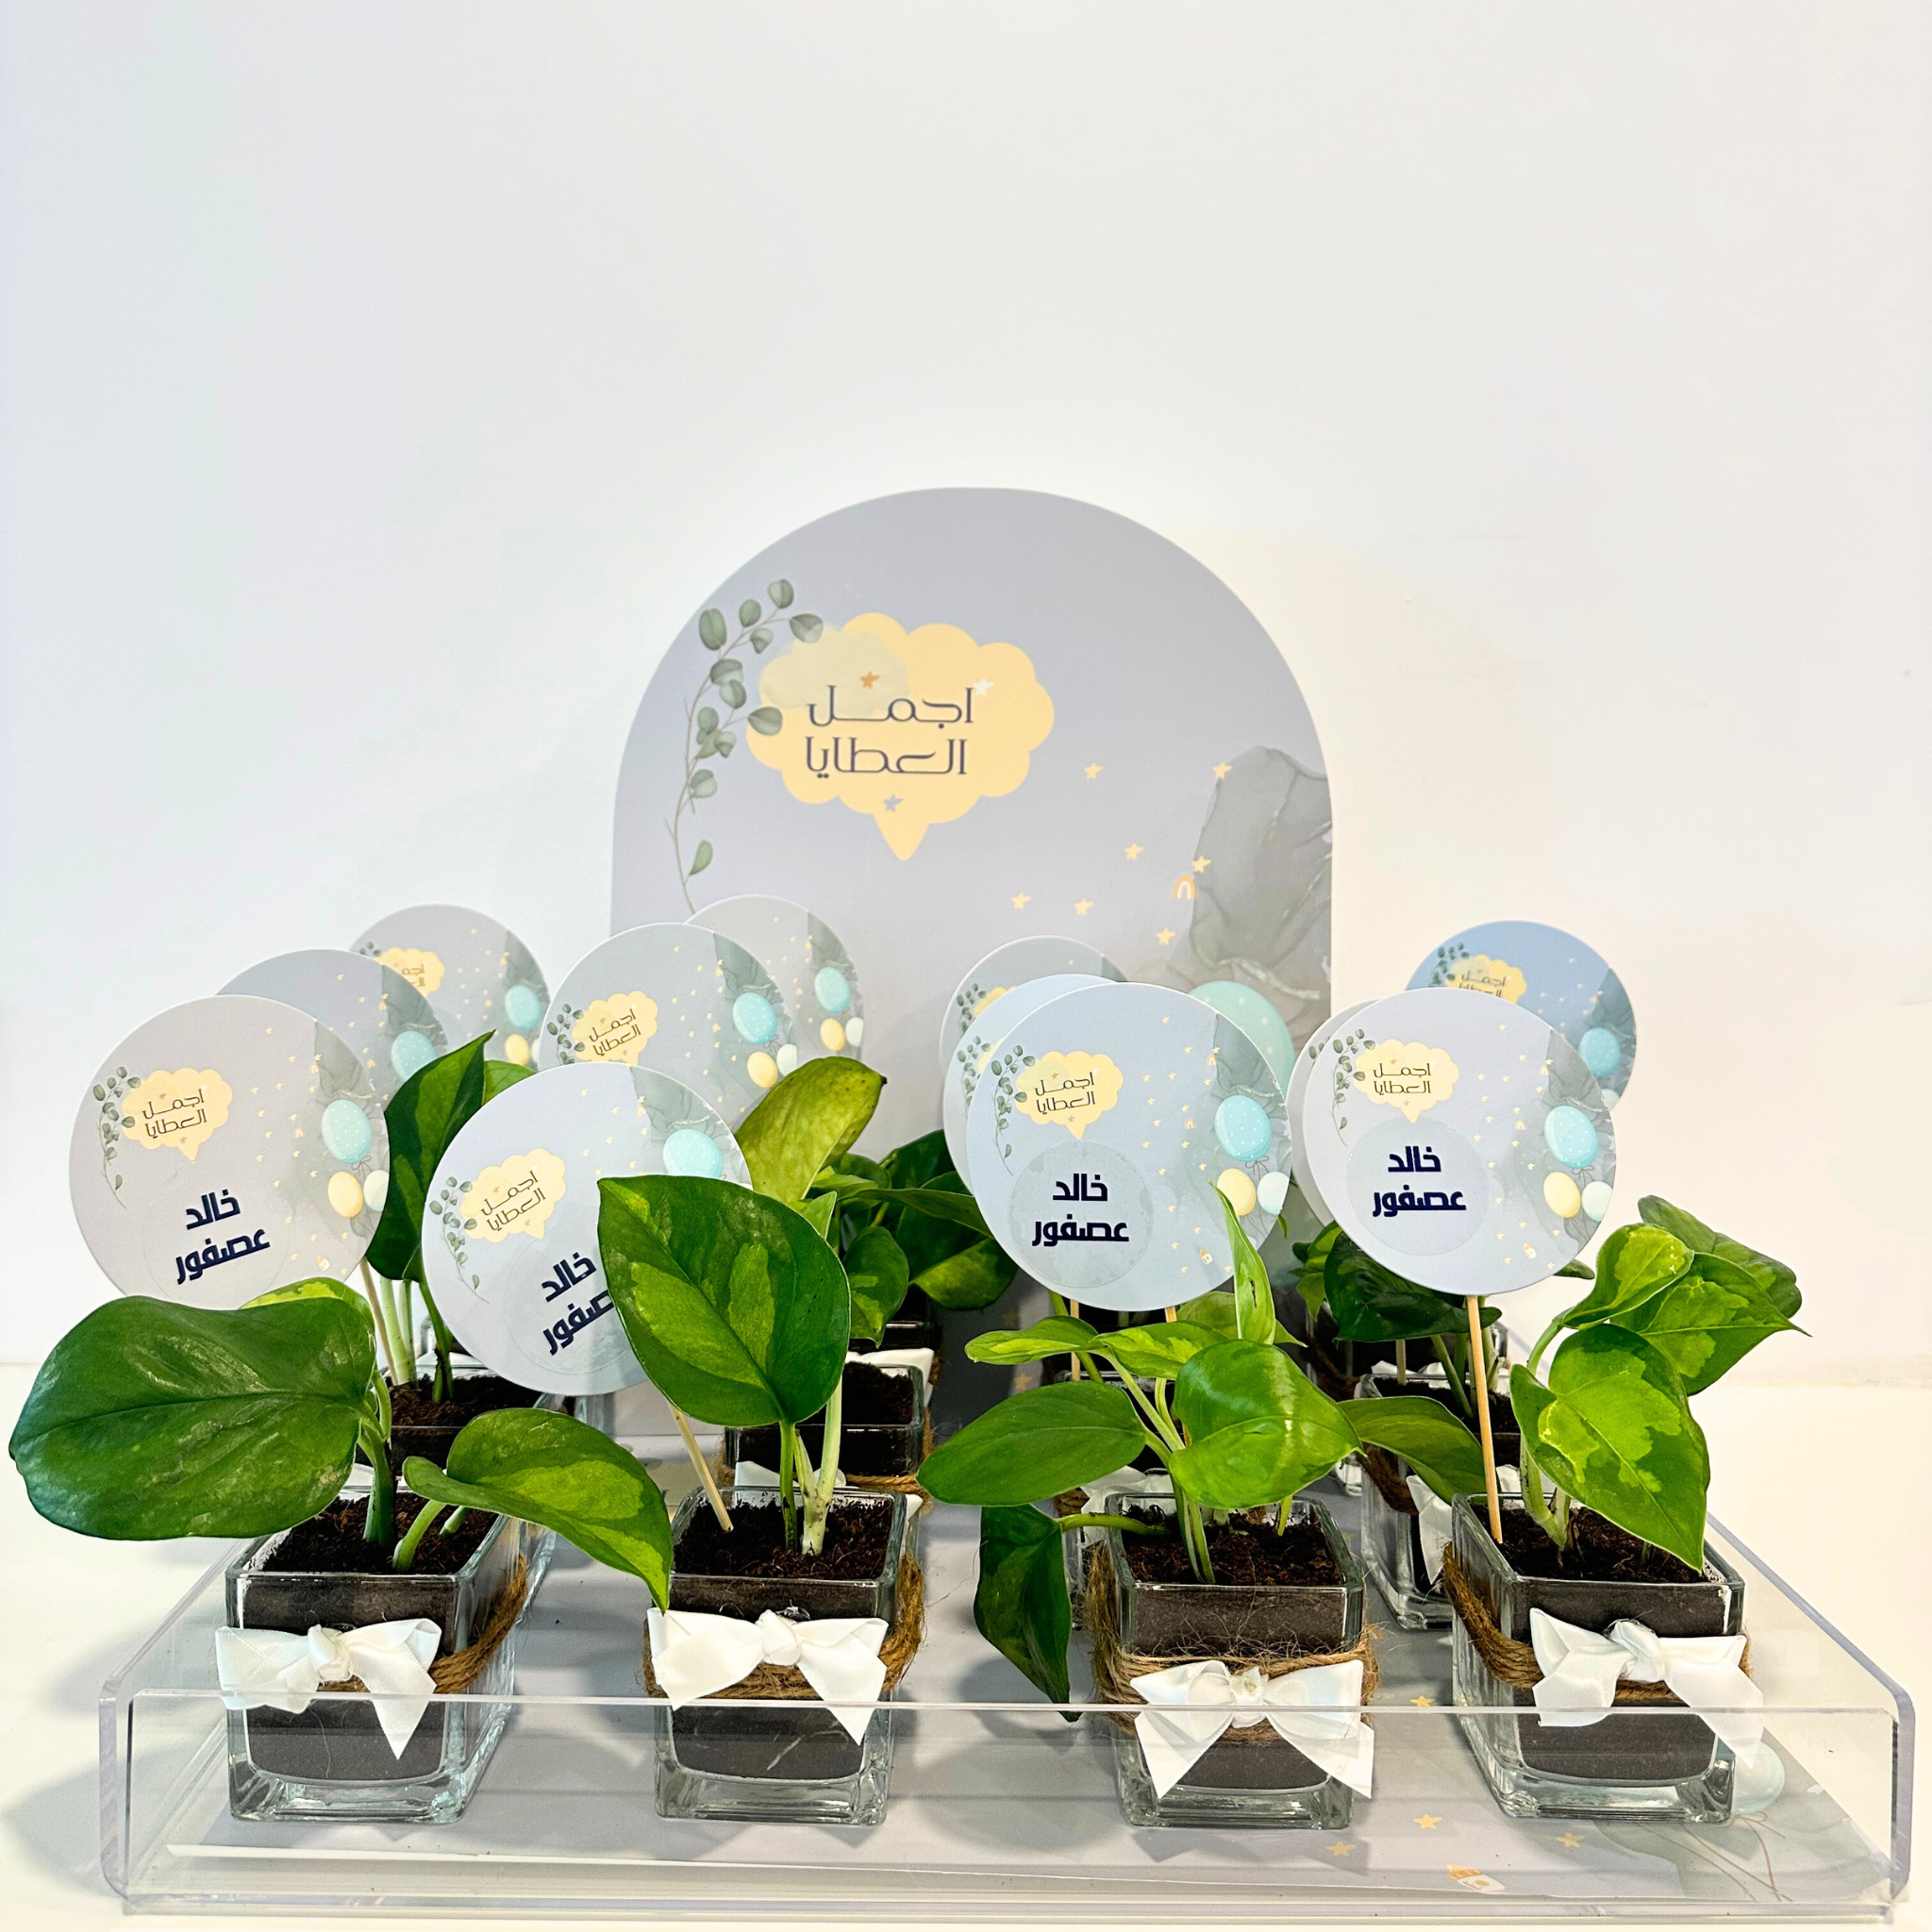 New born baby gifts - Mini Pothos plant in glass pot